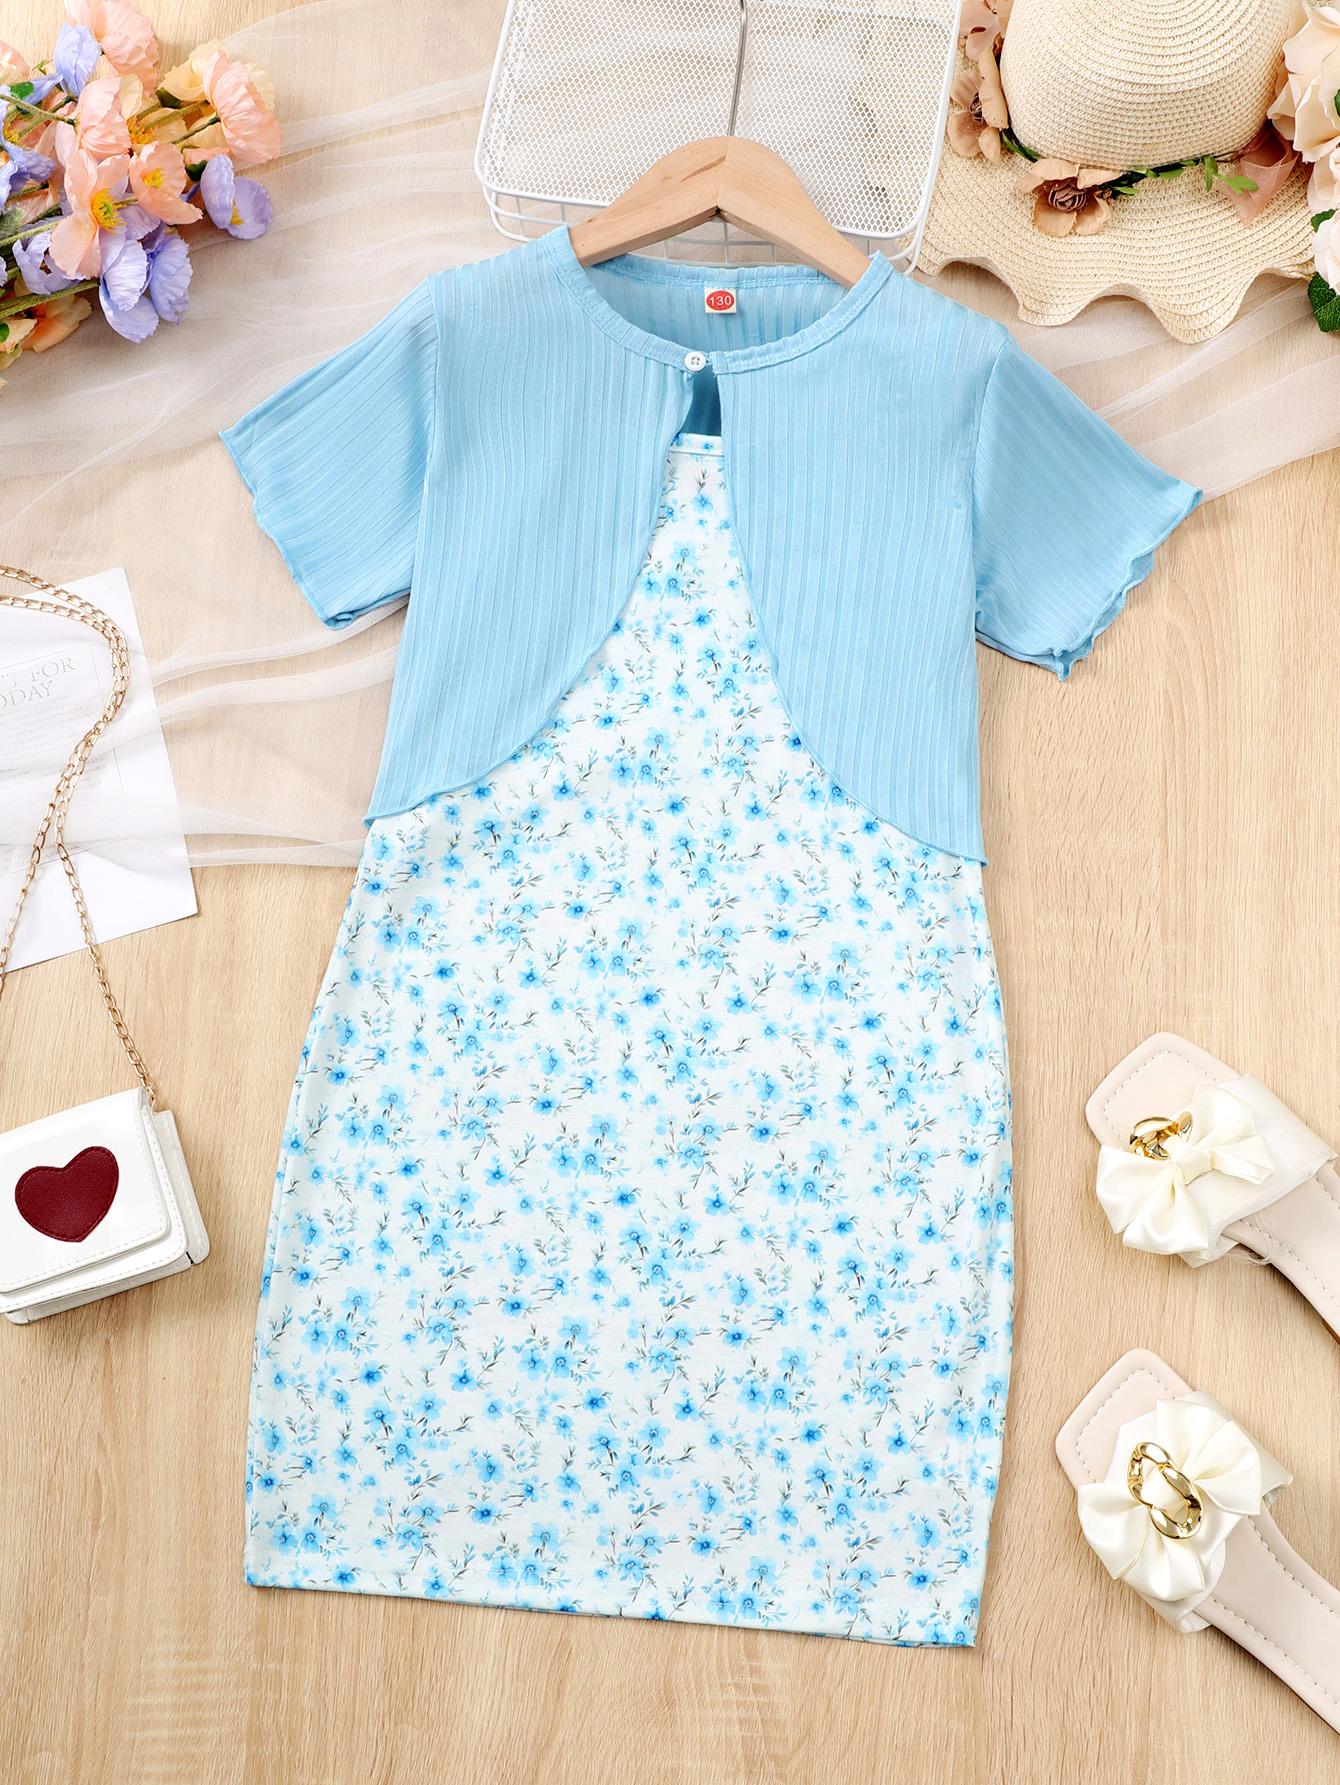 7-14Y Ready Stock Outfit For 7-14y Big Girls Short Sleeve Cardigan Top + Floral Print Cami Dress Holiday Casual Set, Summer 2PCS Girls Clothes Catpapa 462401050